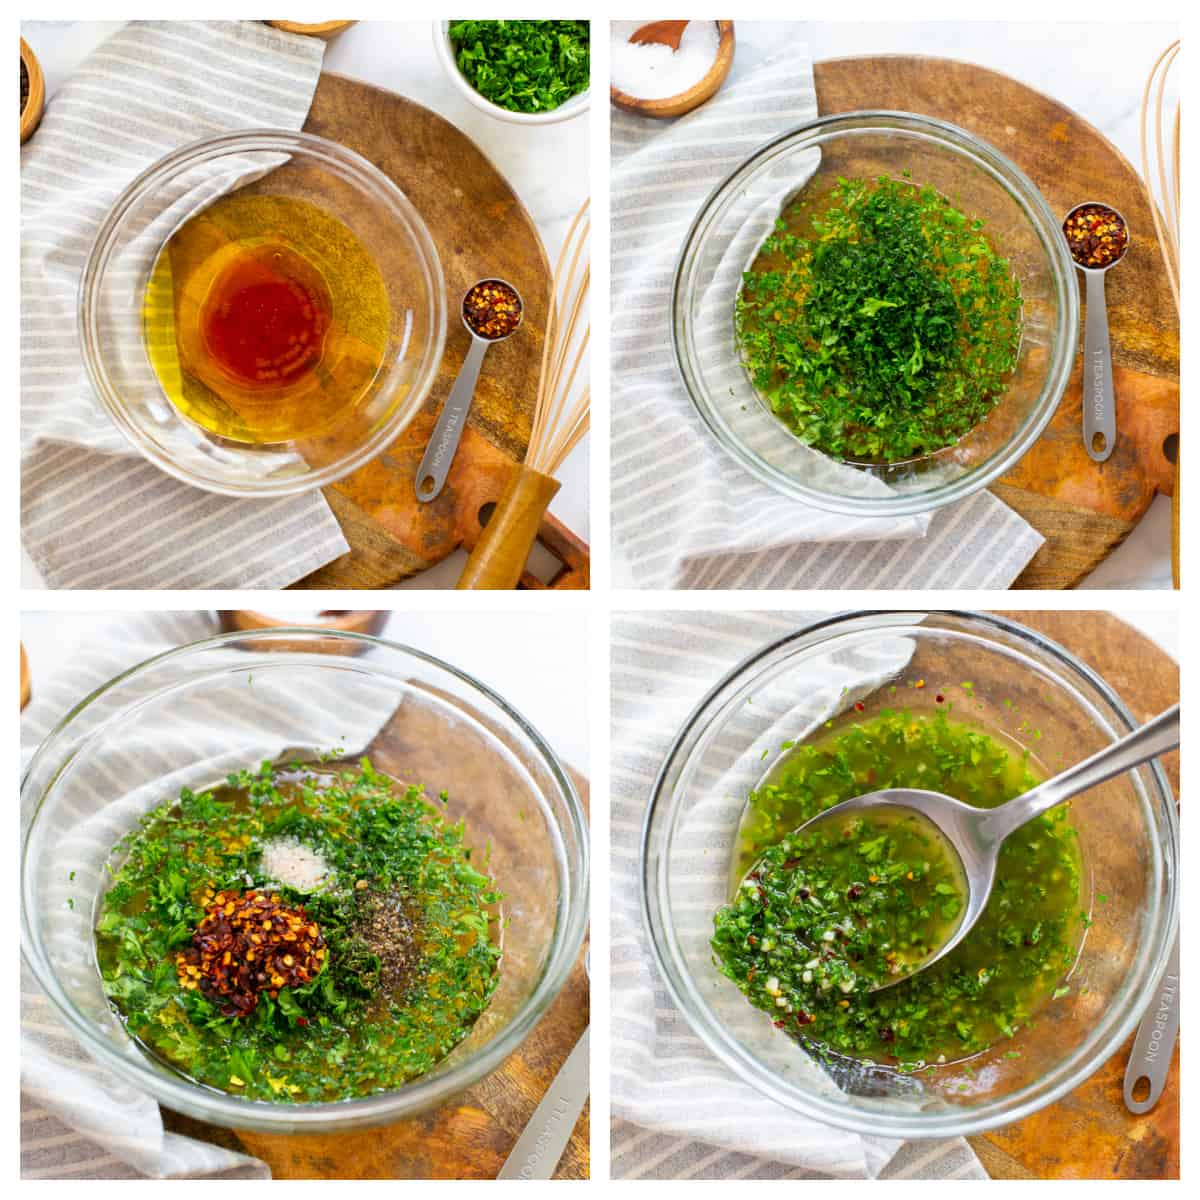 Collage showing how to make cilantro chimichurri.